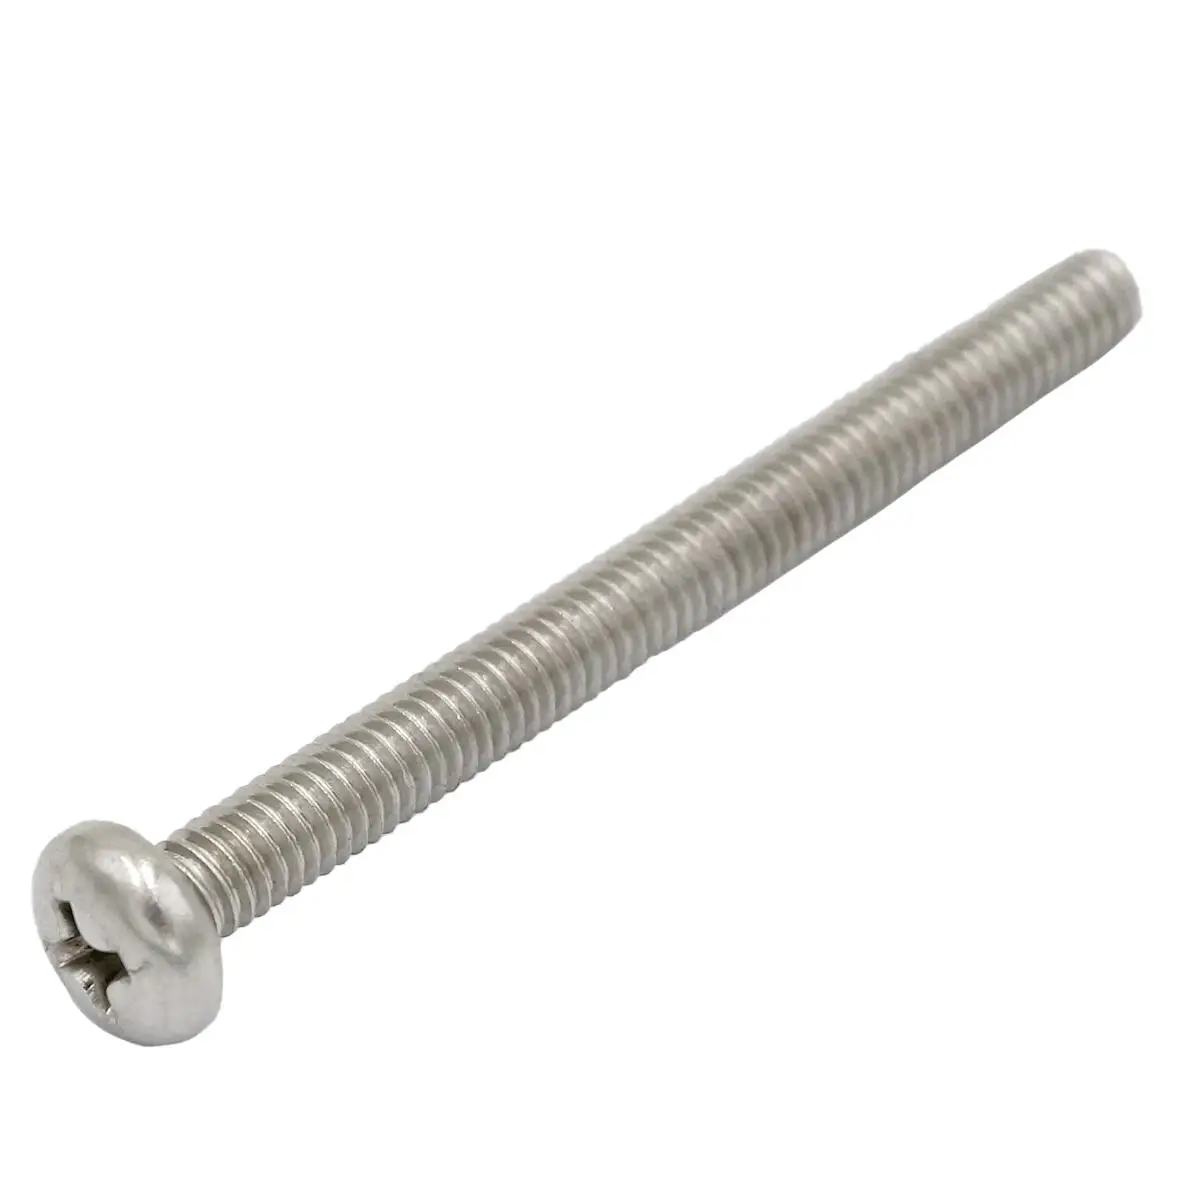 

10pcs M4*45mm Pitch 0.7 Phillips Pan Head 304 Stainless Steel Cross Recessed Machine Screws Cap Bolts Nuts